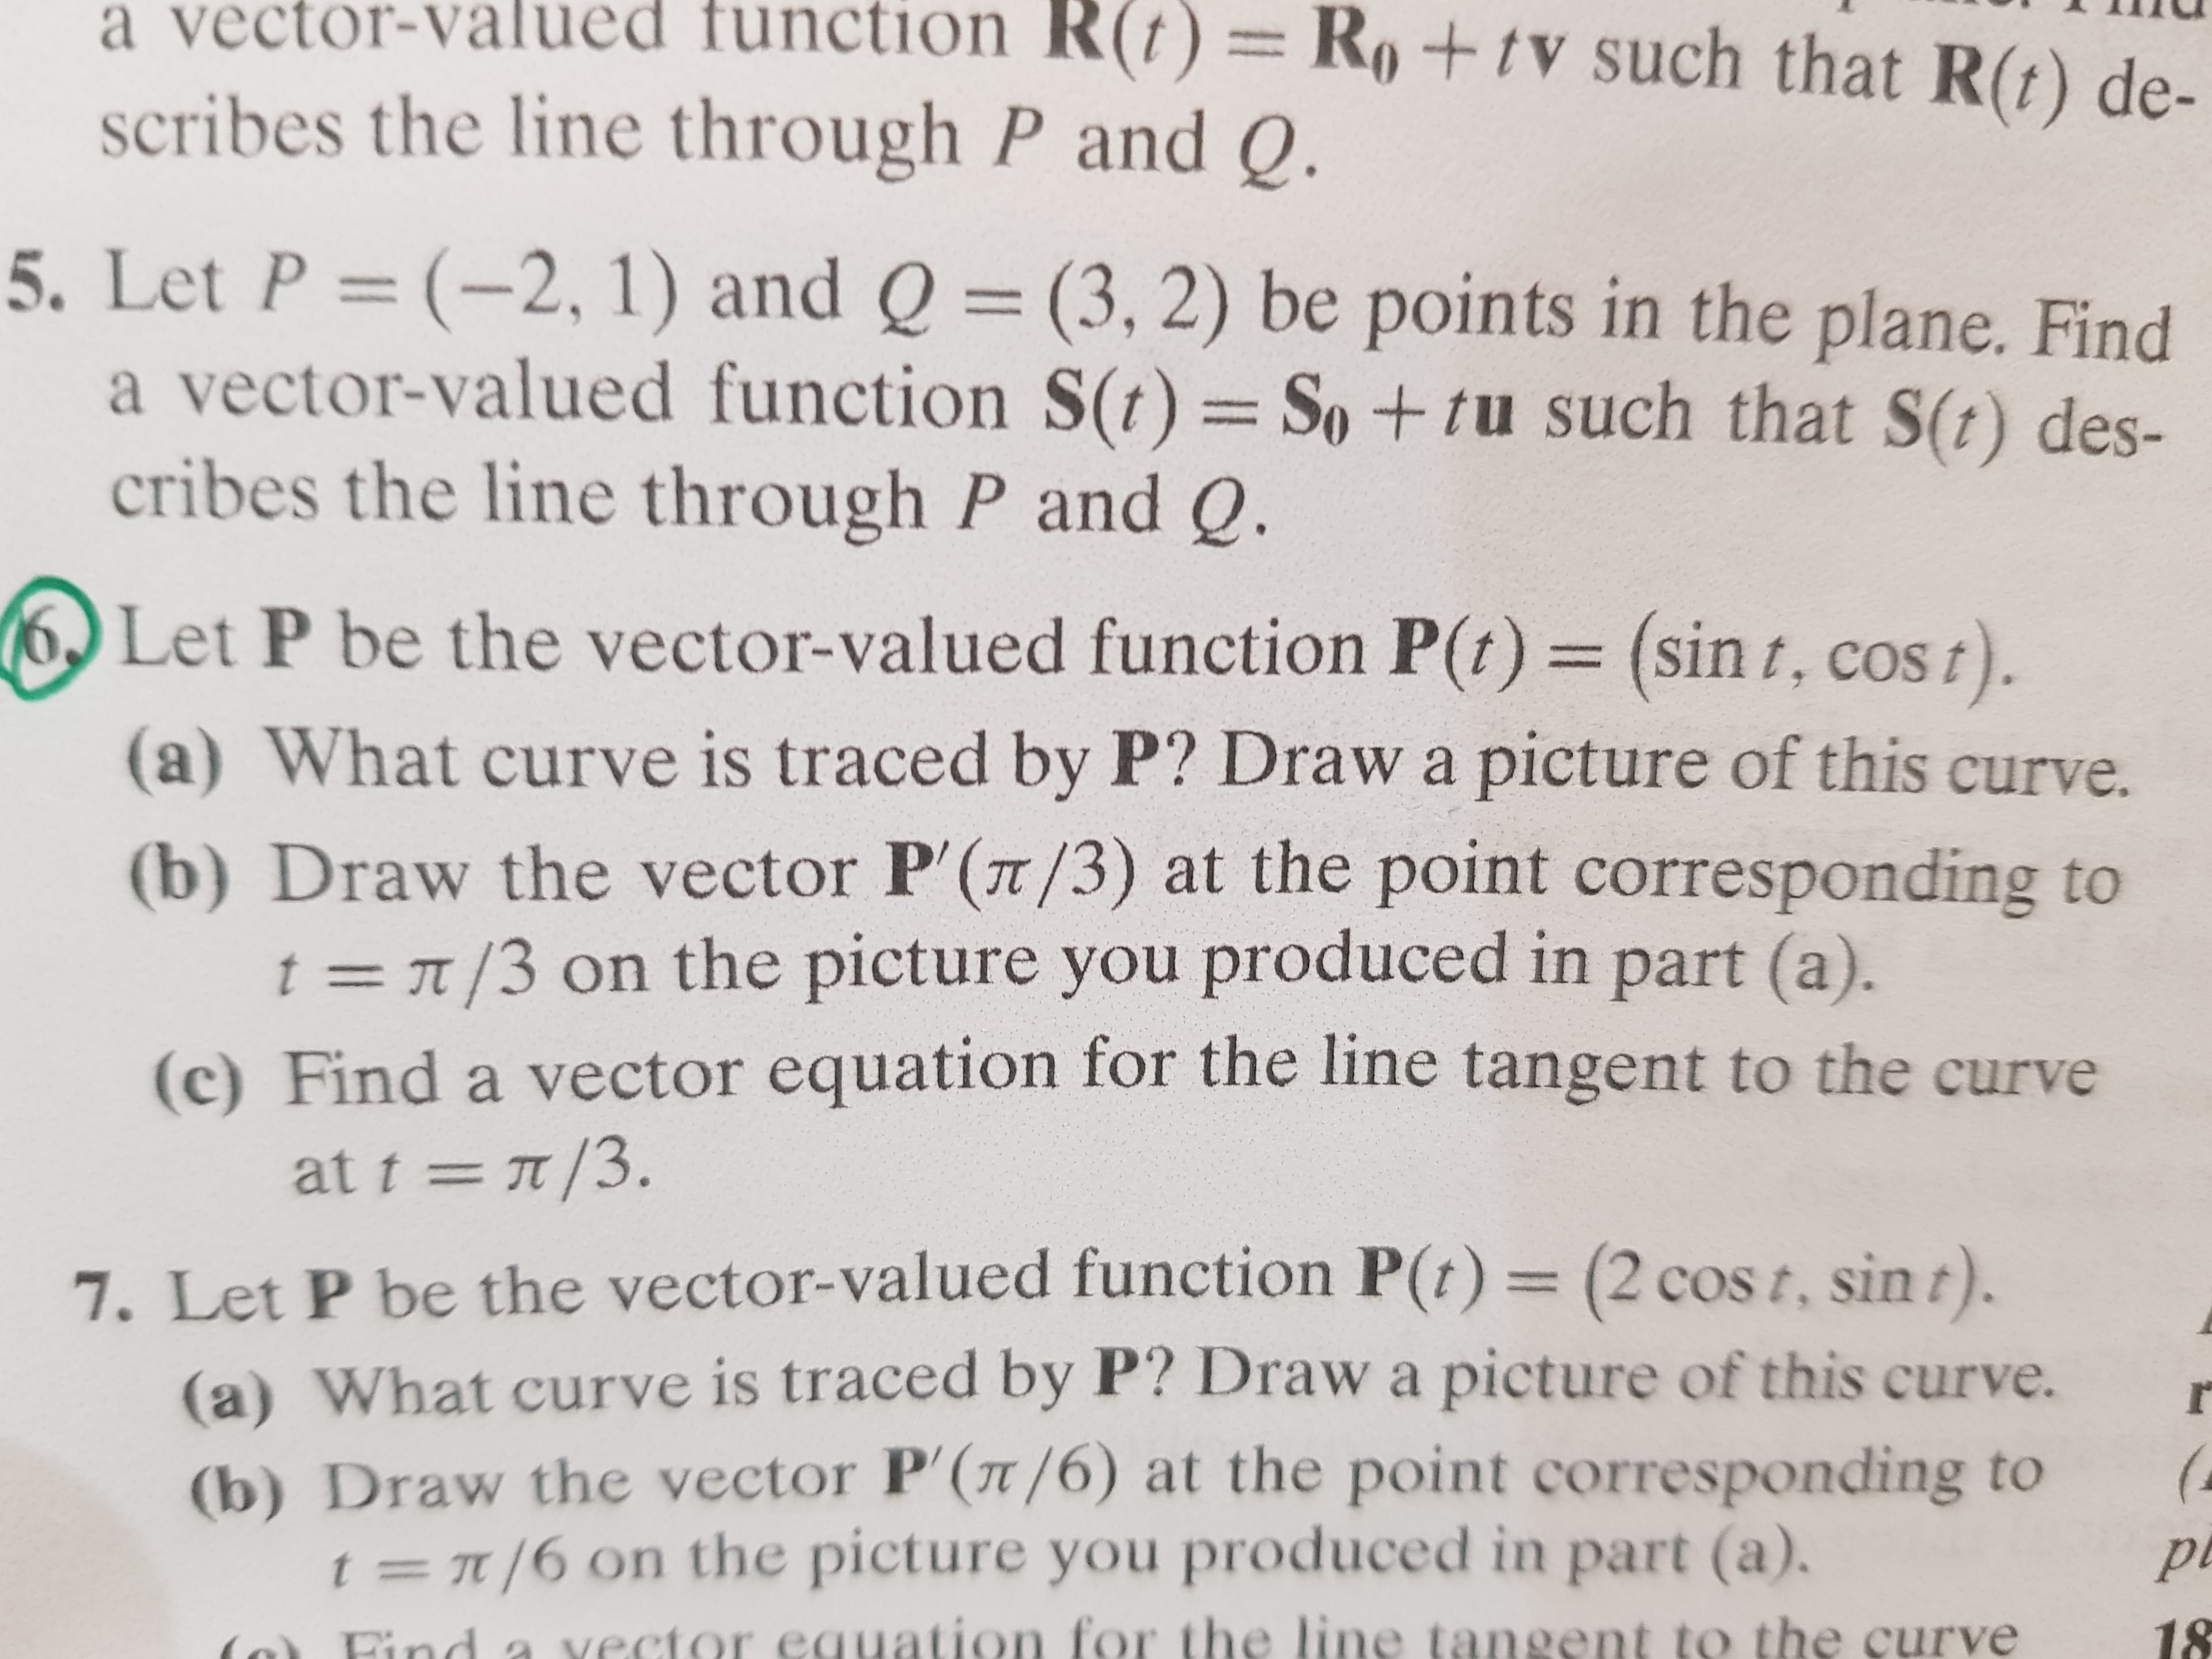 a vector-valued function R(t)=Ro+ tV such that R(t) de-
scribes the line through P and Q.
5. Let P (-2, 1) and Q (3, 2) be points in the plane. Find
a vector-valued function S(t) =
cribes the line through P and Q.
So+tu such that S(t) des-
Let P be the vector-valued function P(t) = (sin t, cos t).
What curve is traced by P? Draw a picture of this curve.
(a)
(b) Draw the vector P'(T/3) at the point corresponding to
t = r /3 on the picture you produced in part (a).
(c) Find a vector equation for the line tangent to the curve
at tπ/3.
7. Let P be the vector-valued function P(t)= (2 cos t, sin t).
(a) What curve is traced by P? Drawa picture of this curve.
(b) Draw the vector P'(T/6) at the point corresponding to
t r/6 on the picture you produced in part (a).
(a
vector equation for the line tangent to the curve
18
Eind
